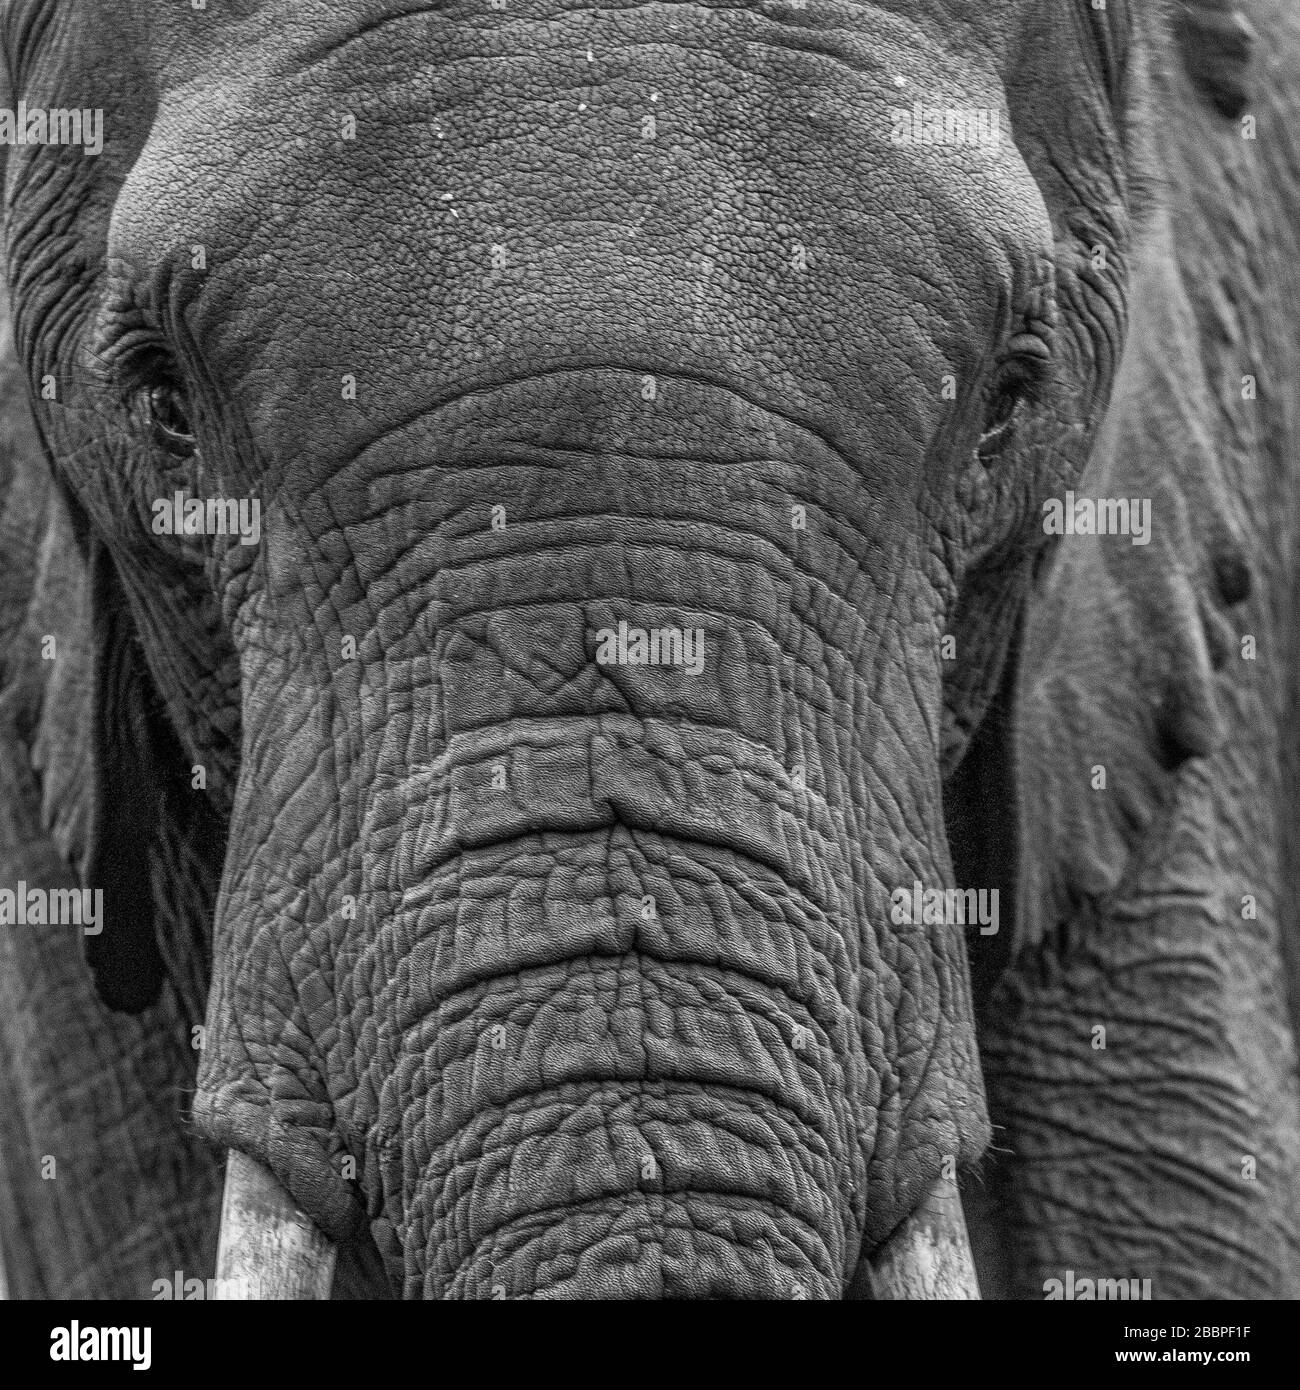 Eye contact - the head of a large bull elephant in Aberdare National Park, Kenya Stock Photo